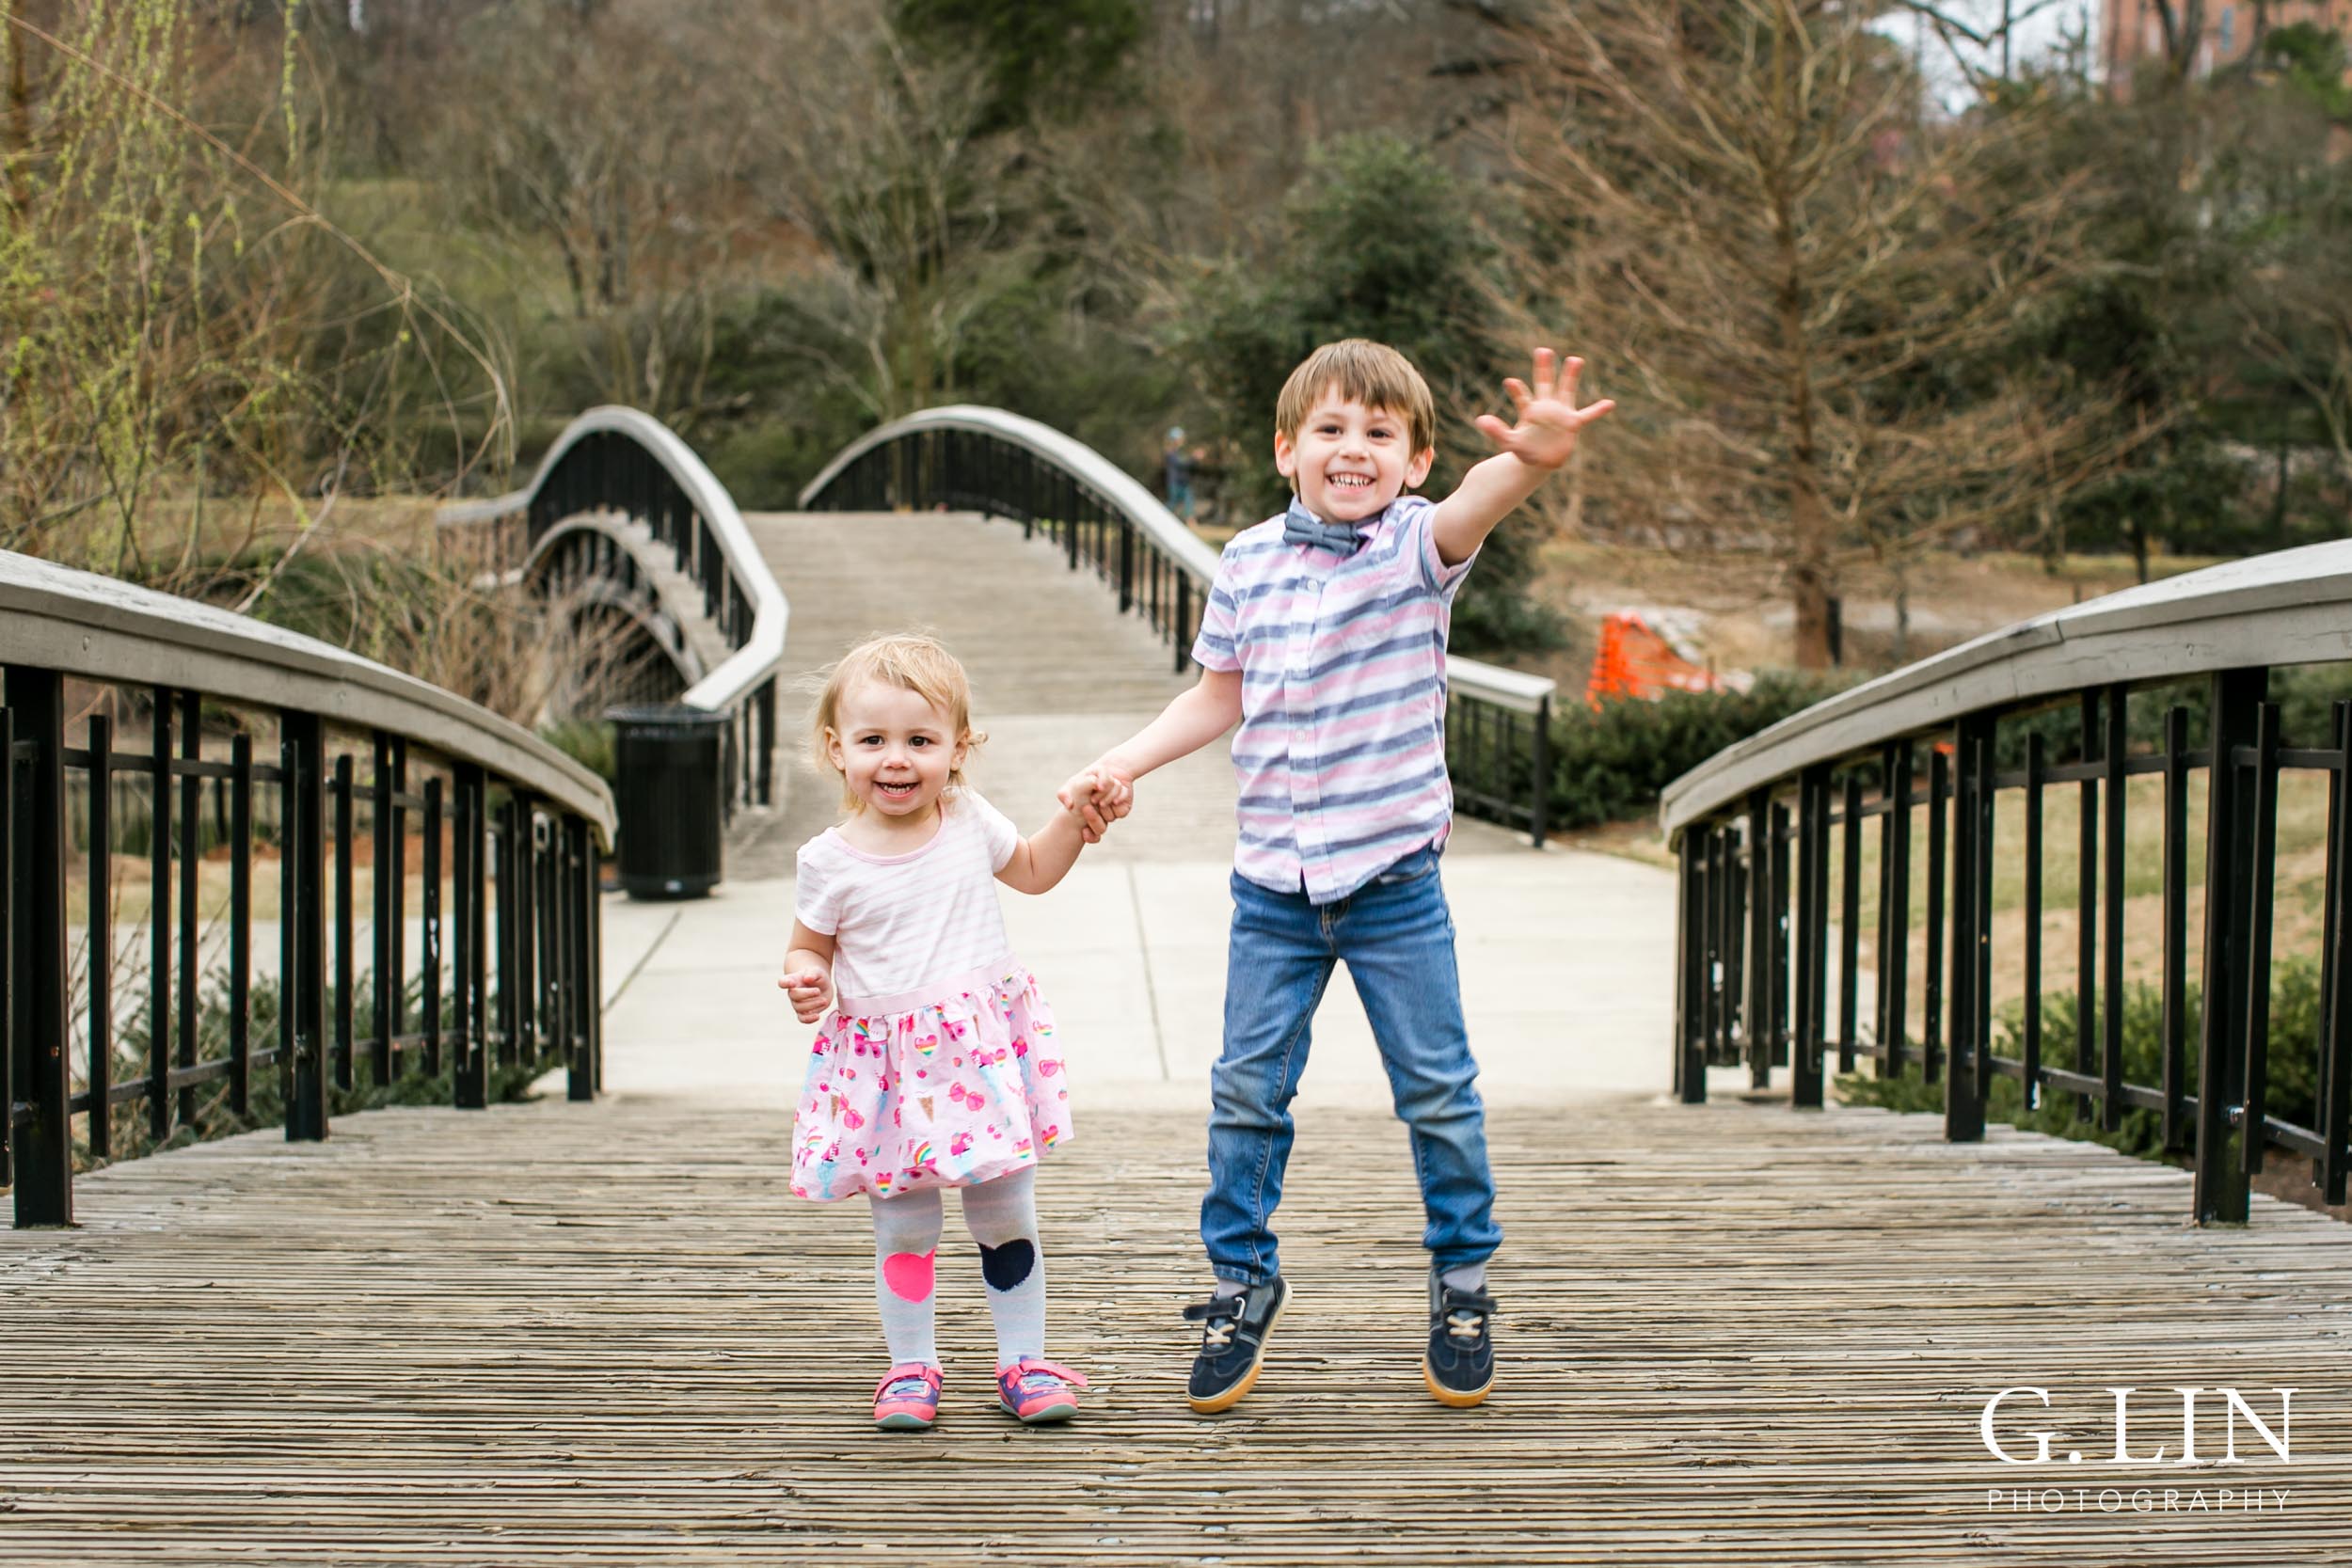 Raleigh Family Photographer | G. Lin Photography | Children holding hands and jumping